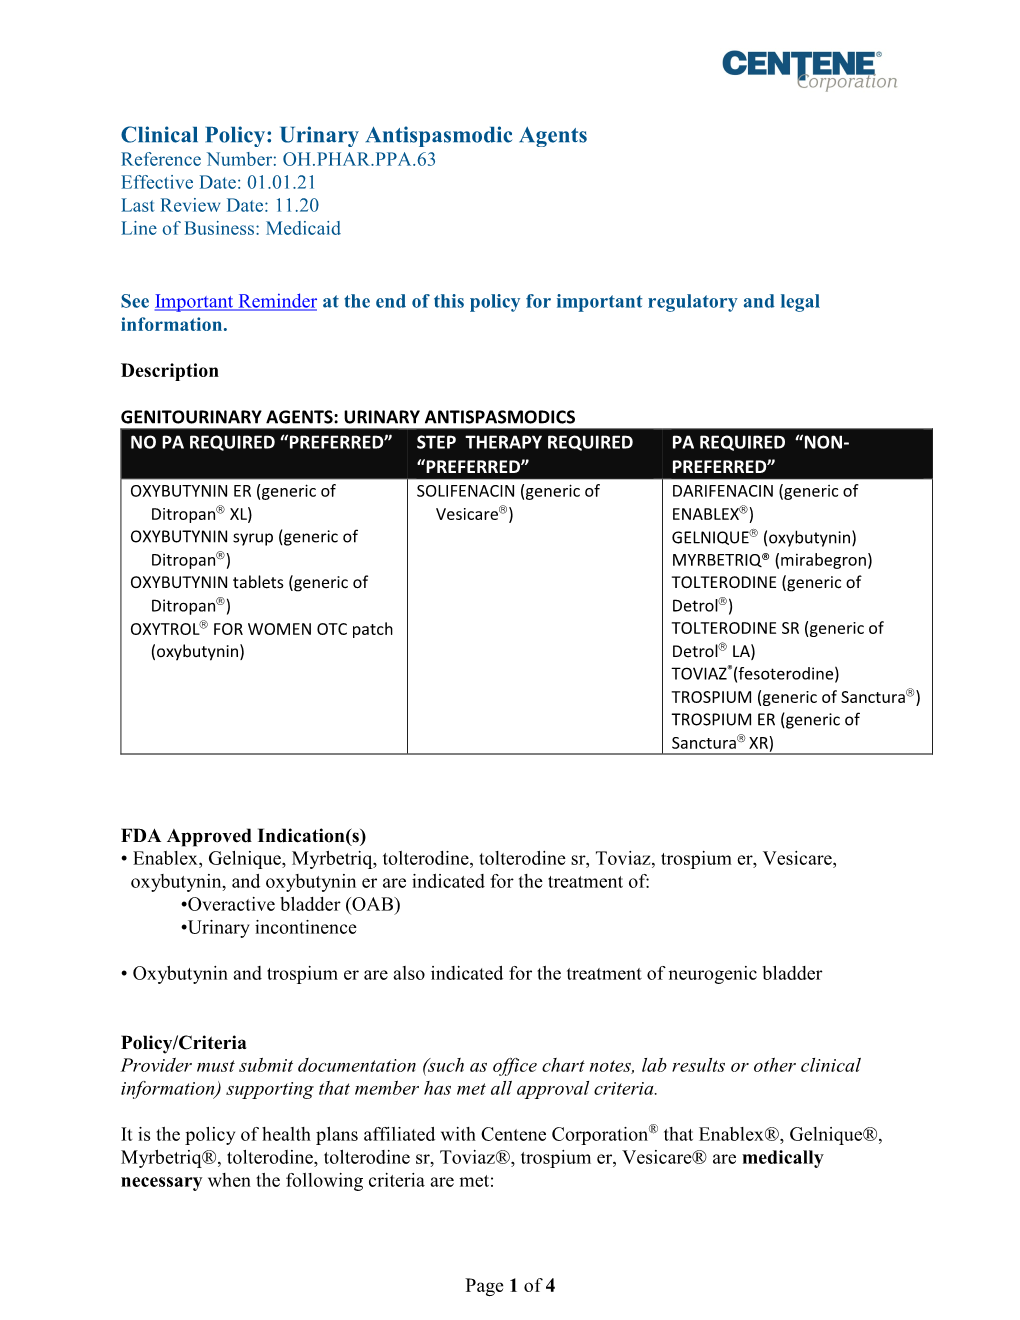 Urinary Antispasmodic Agents Reference Number: OH.PHAR.PPA.63 Effective Date: 01.01.21 Last Review Date: 11.20 Line of Business: Medicaid